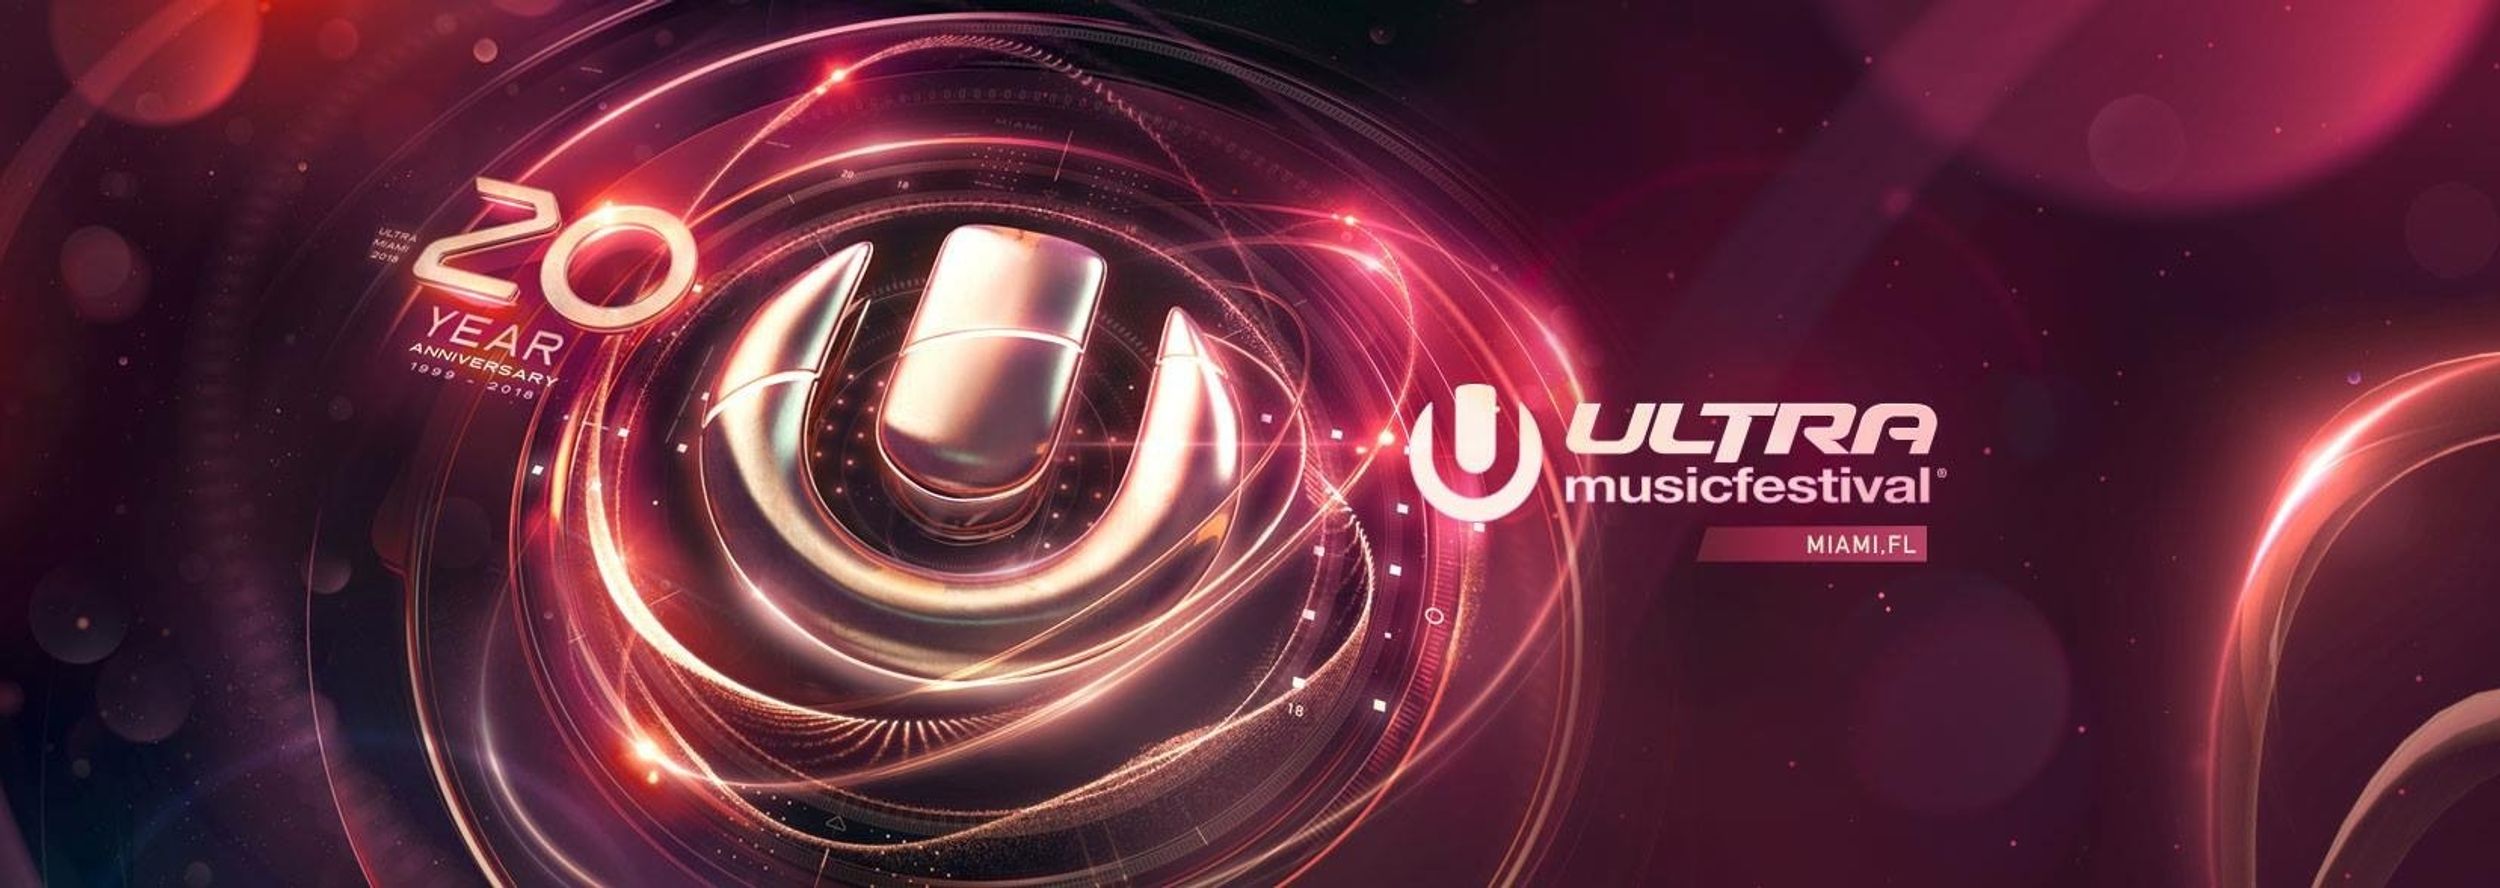 For Your Consideration, While Being at Ultra's 20th Anniversary